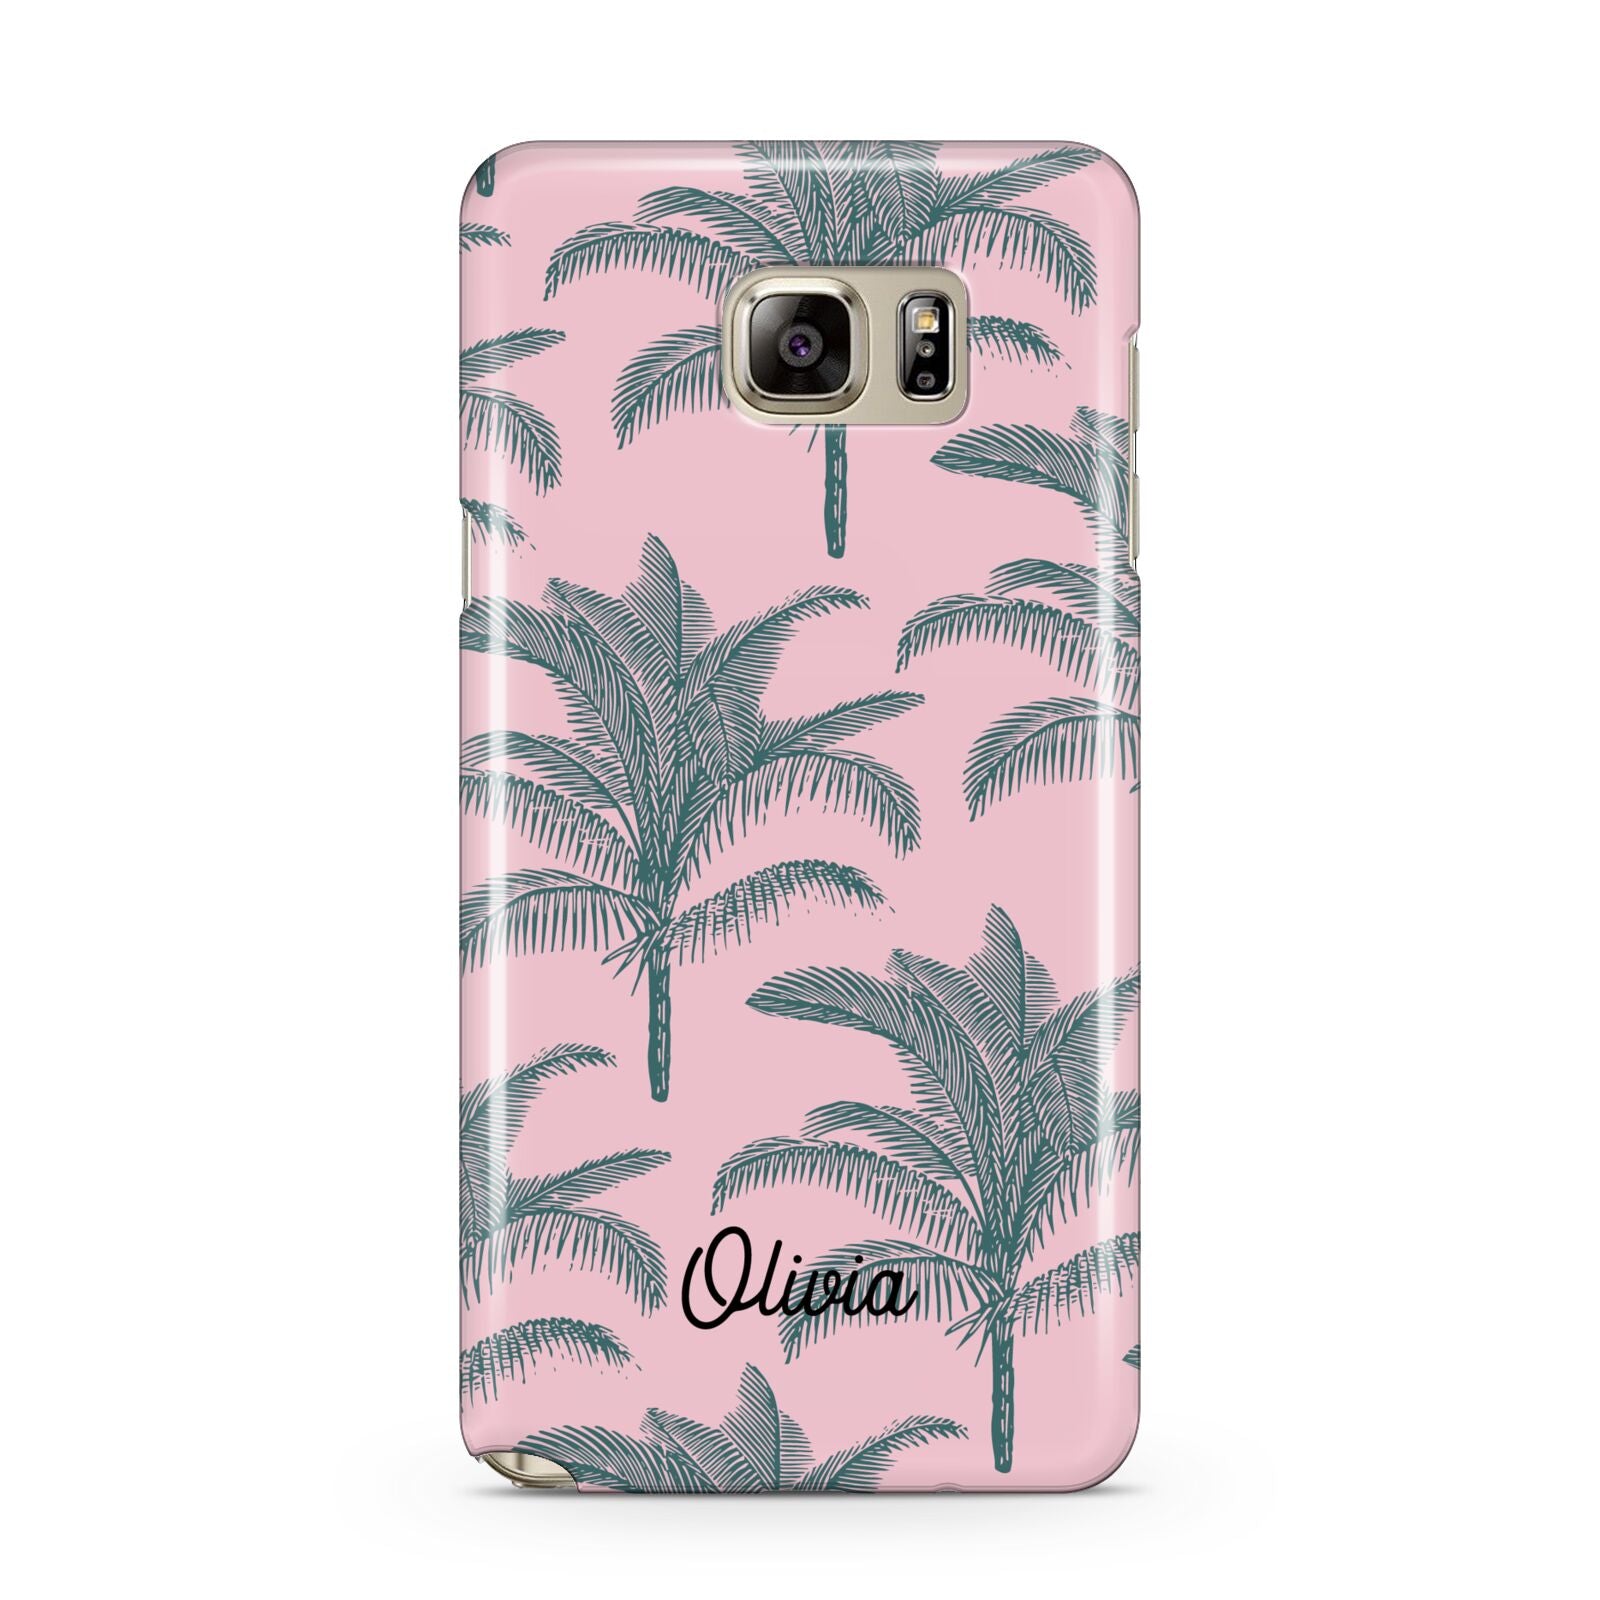 Personalised Palm Samsung Galaxy Note 5 Case